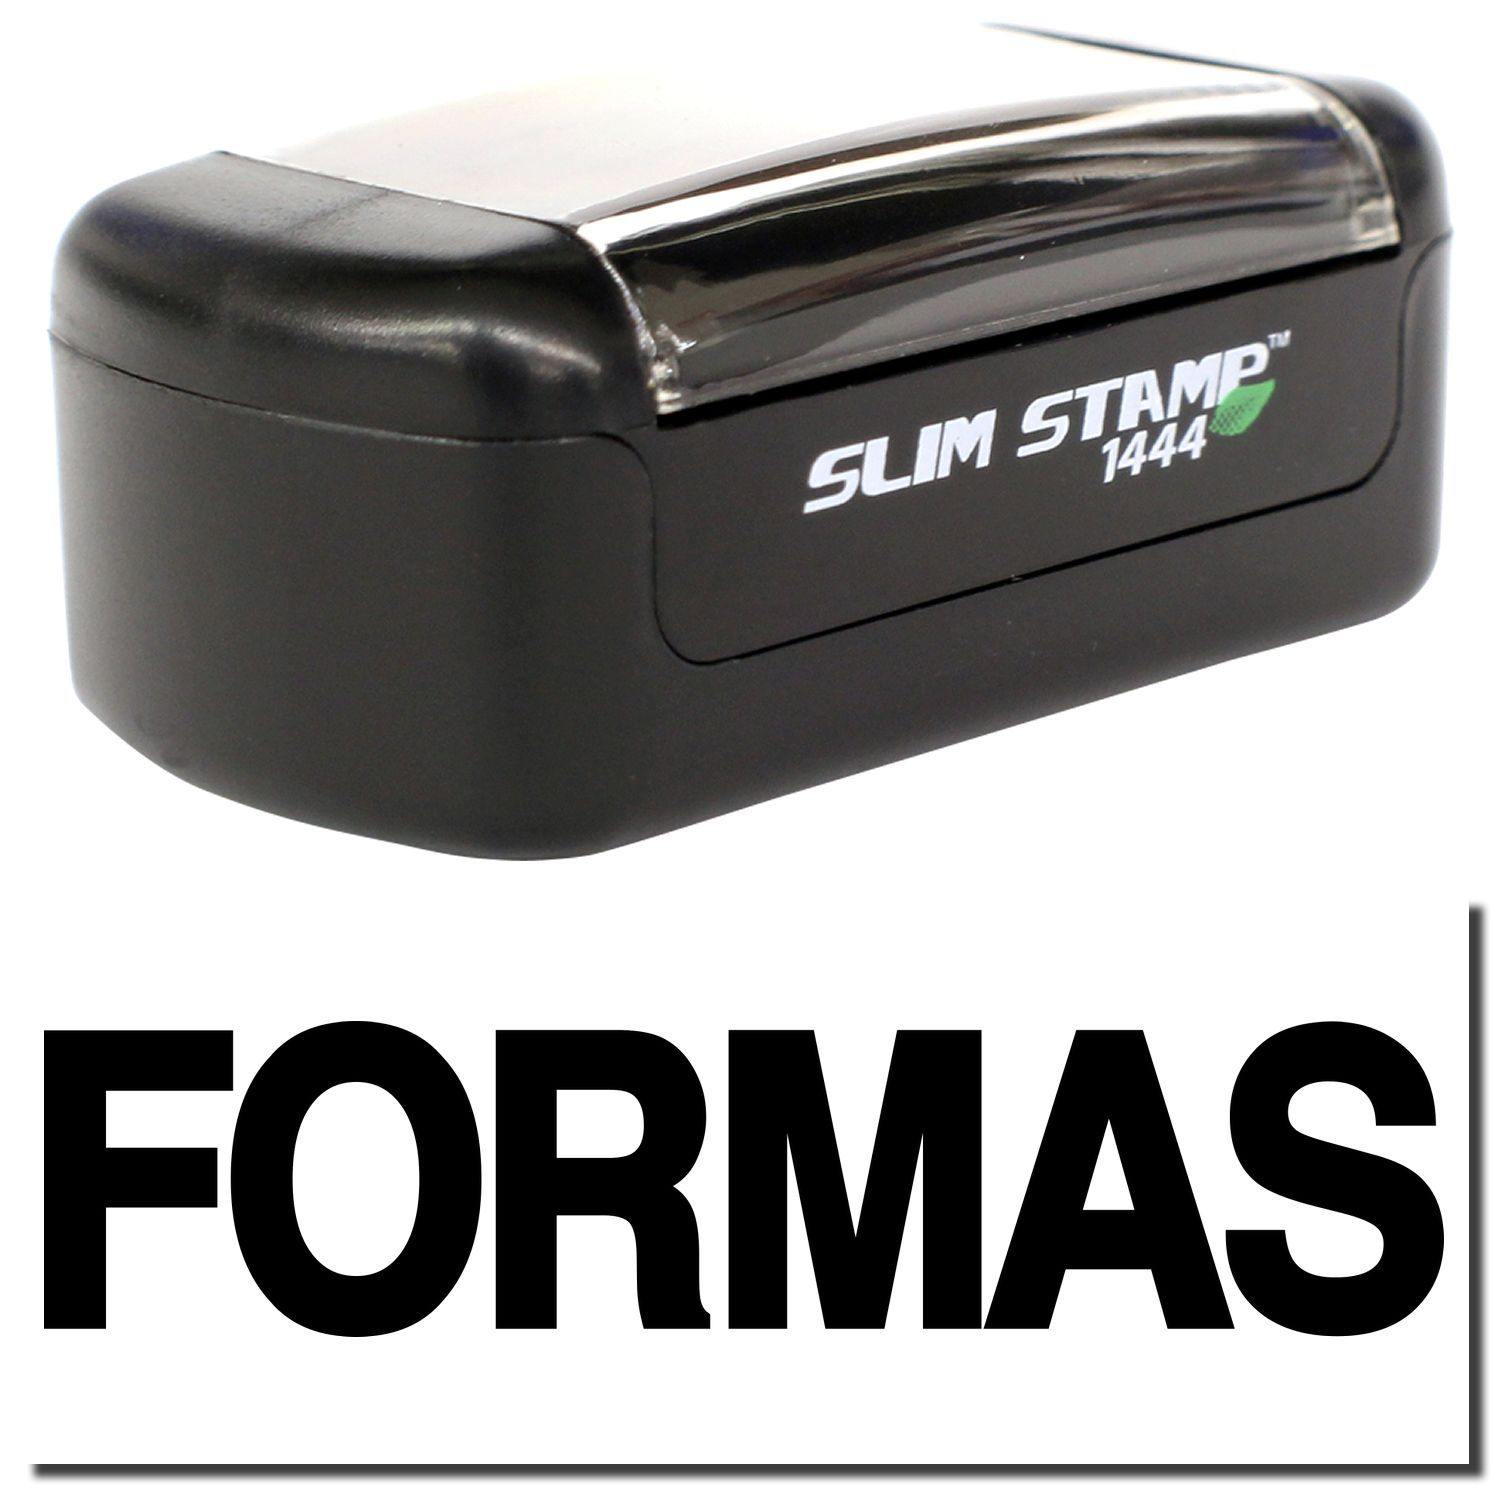 A stock office pre-inked stamp with a stamped image showing how the text "FORMAS" is displayed after stamping.